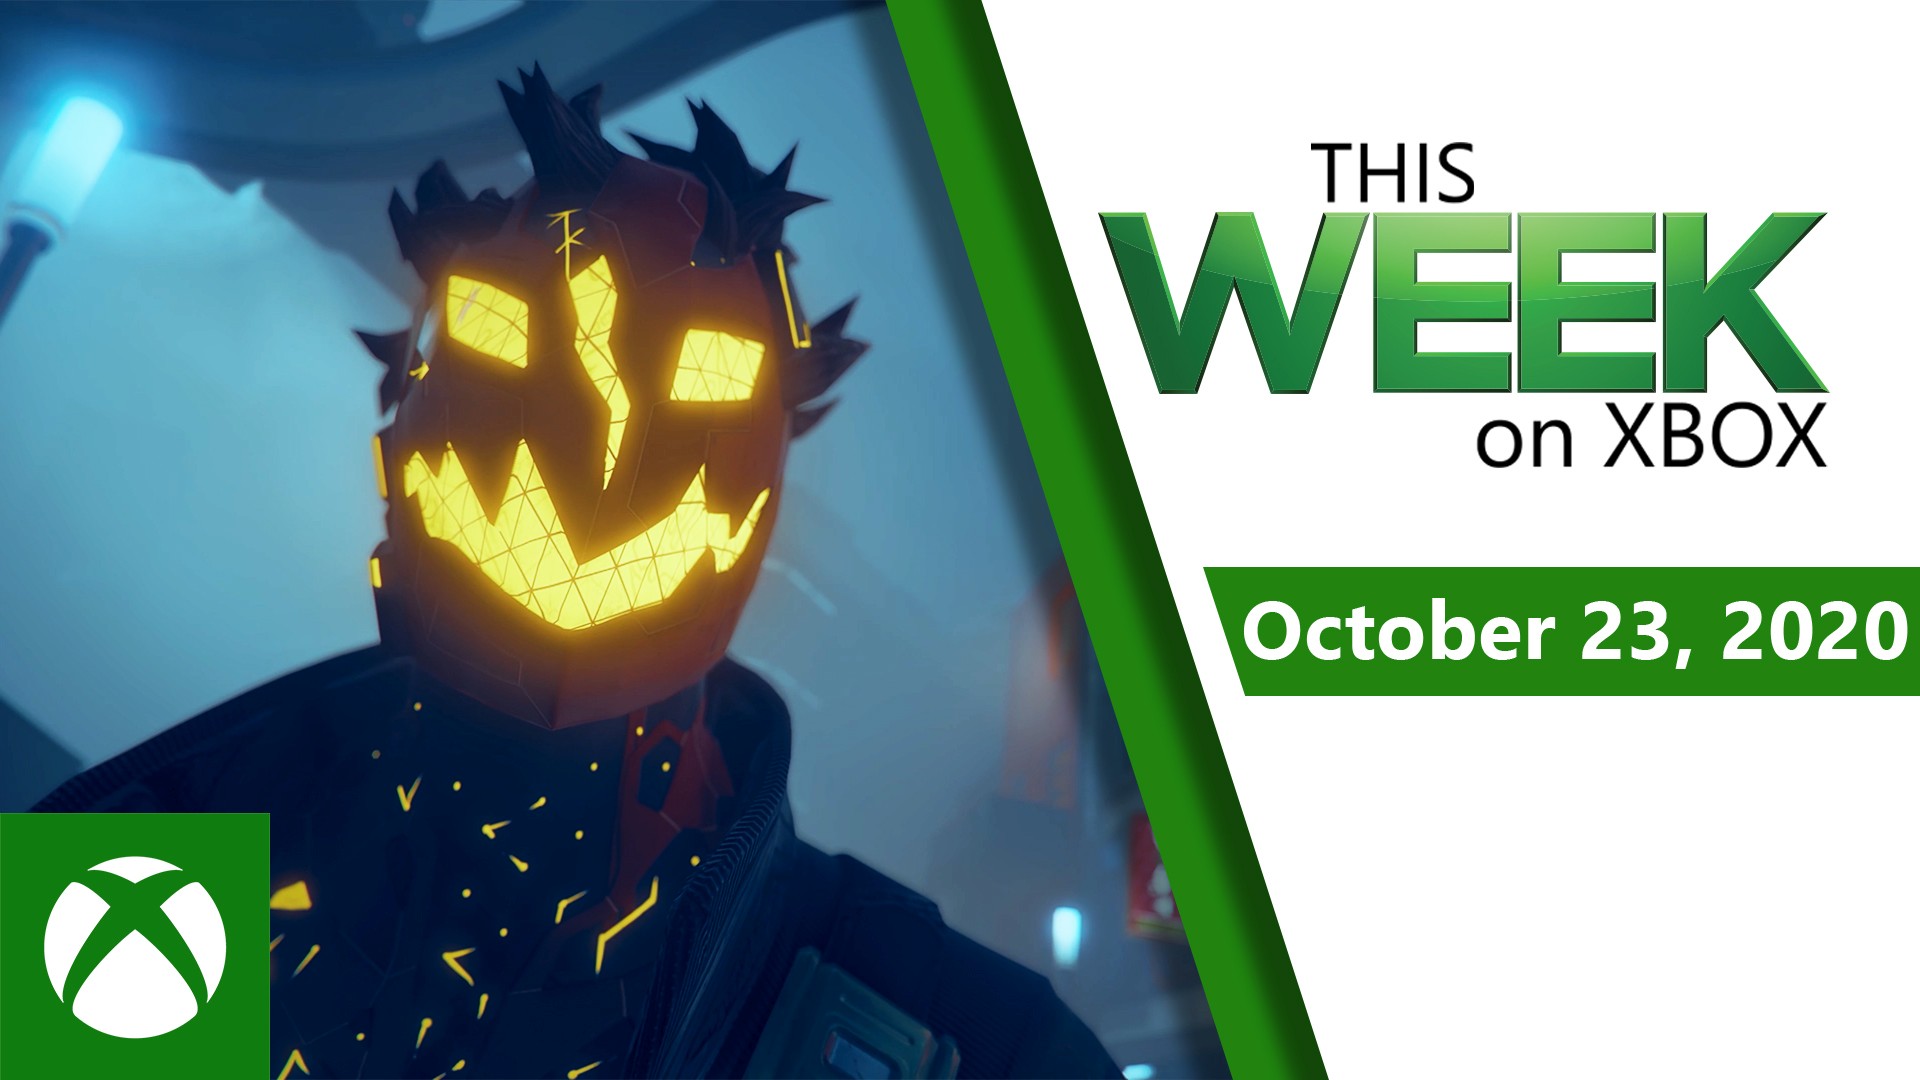 Video For This Week on Xbox: October 23, 2020